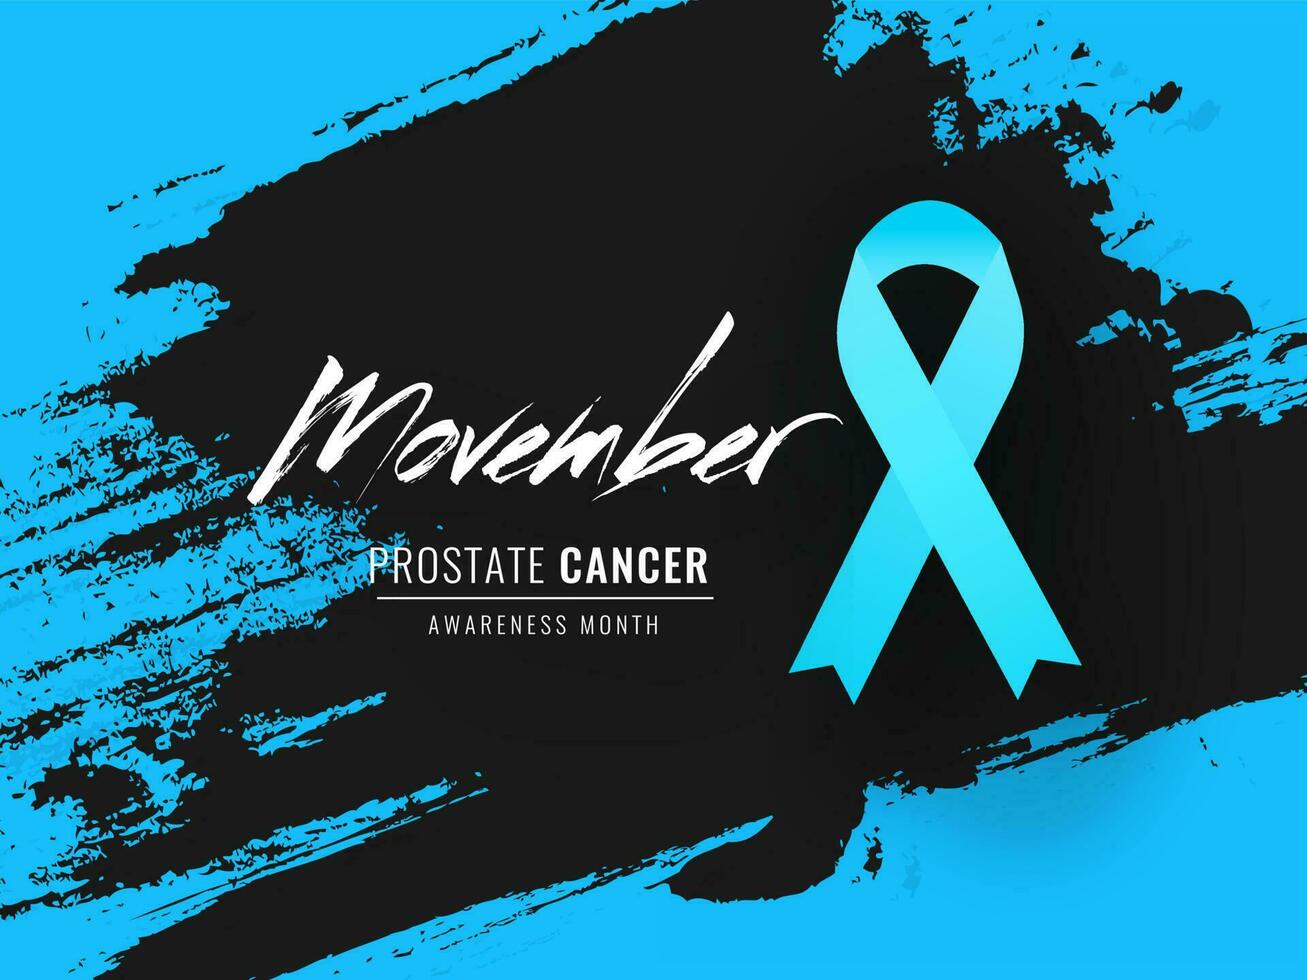 Creative text Movember with Prostate Cancer ribbon and black brush strok grunge effect on blue background for Awareness Month concept. vector